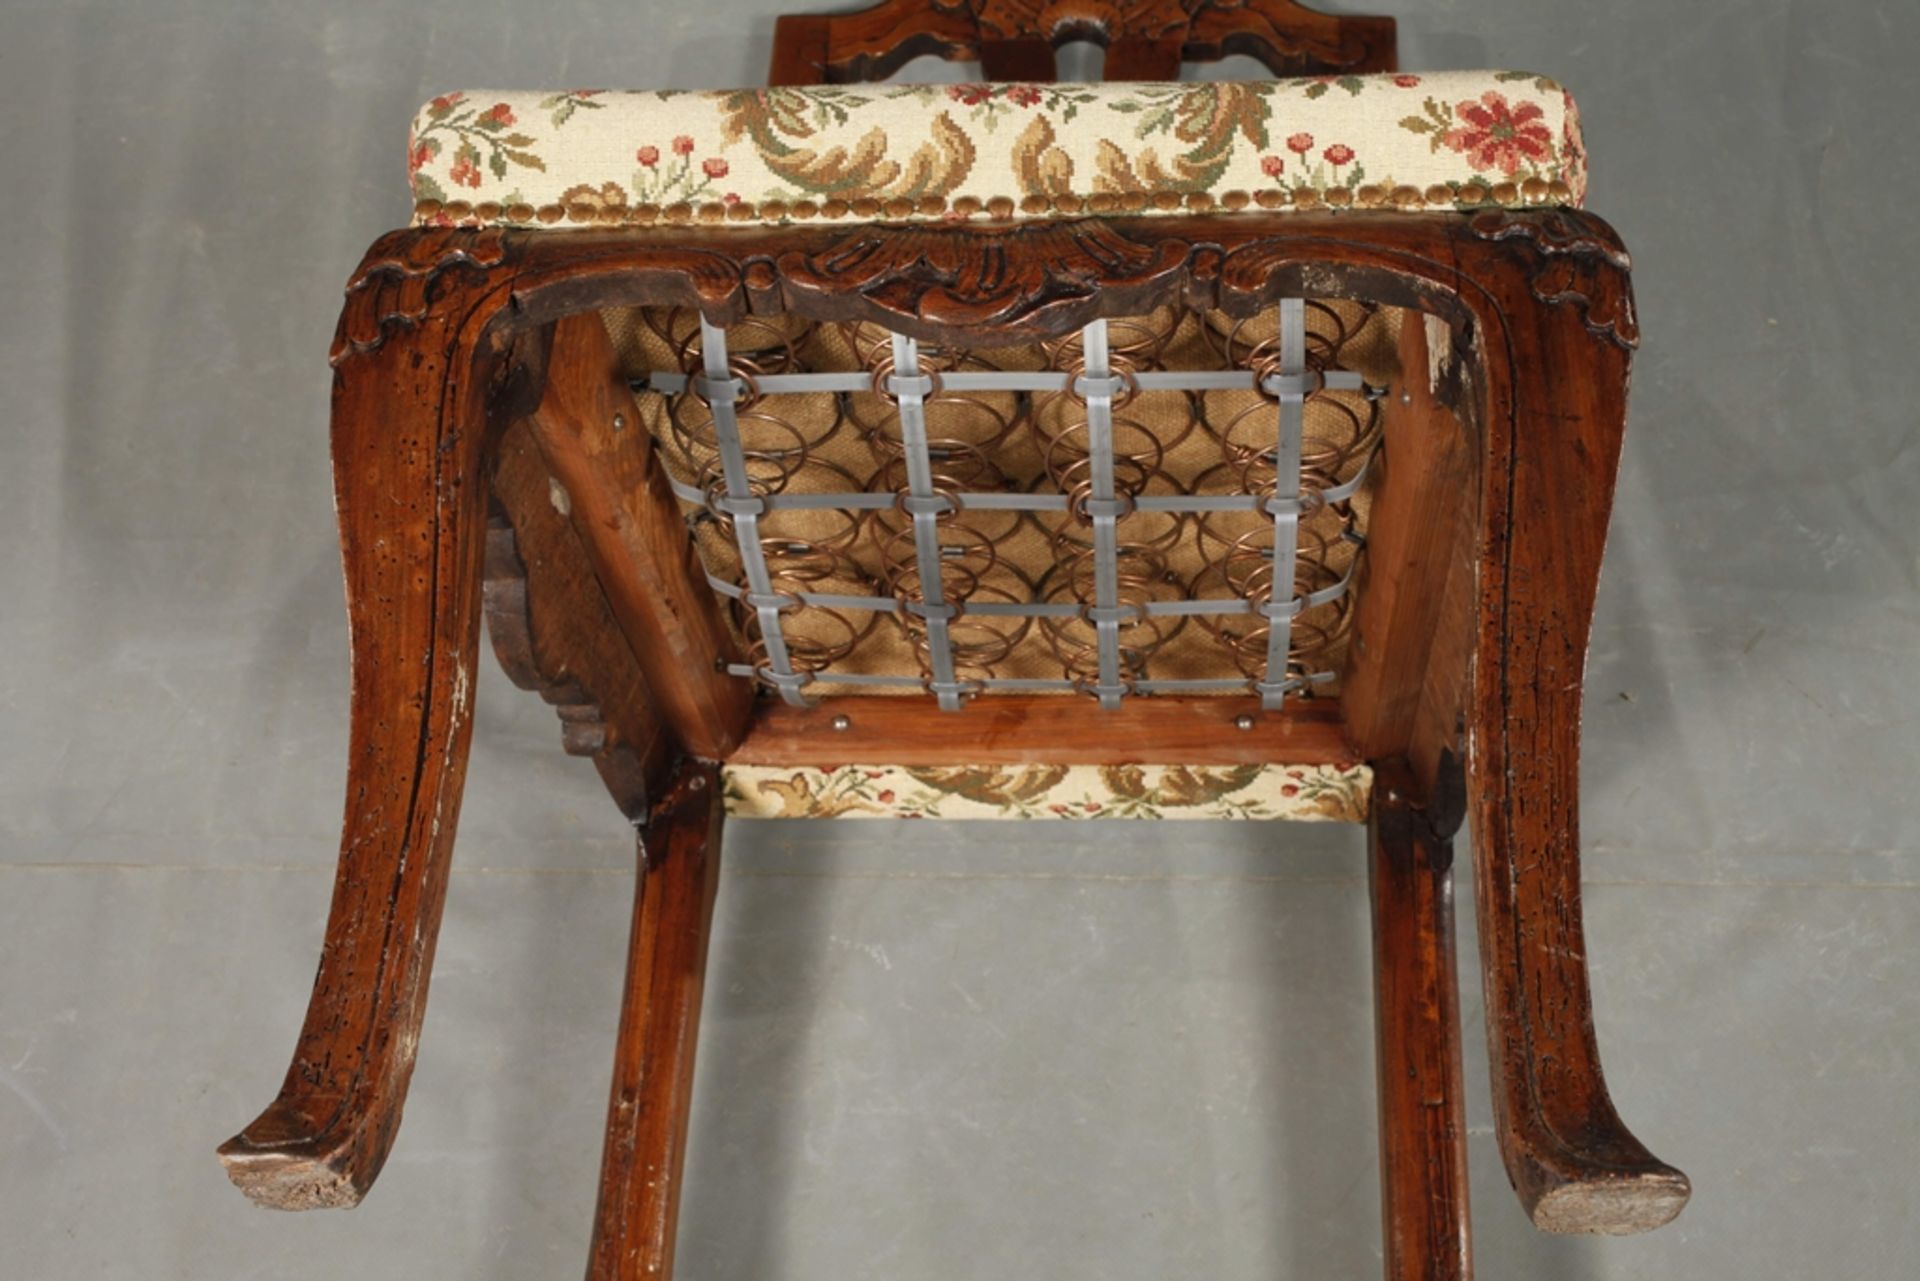 Baroque chair - Image 6 of 6